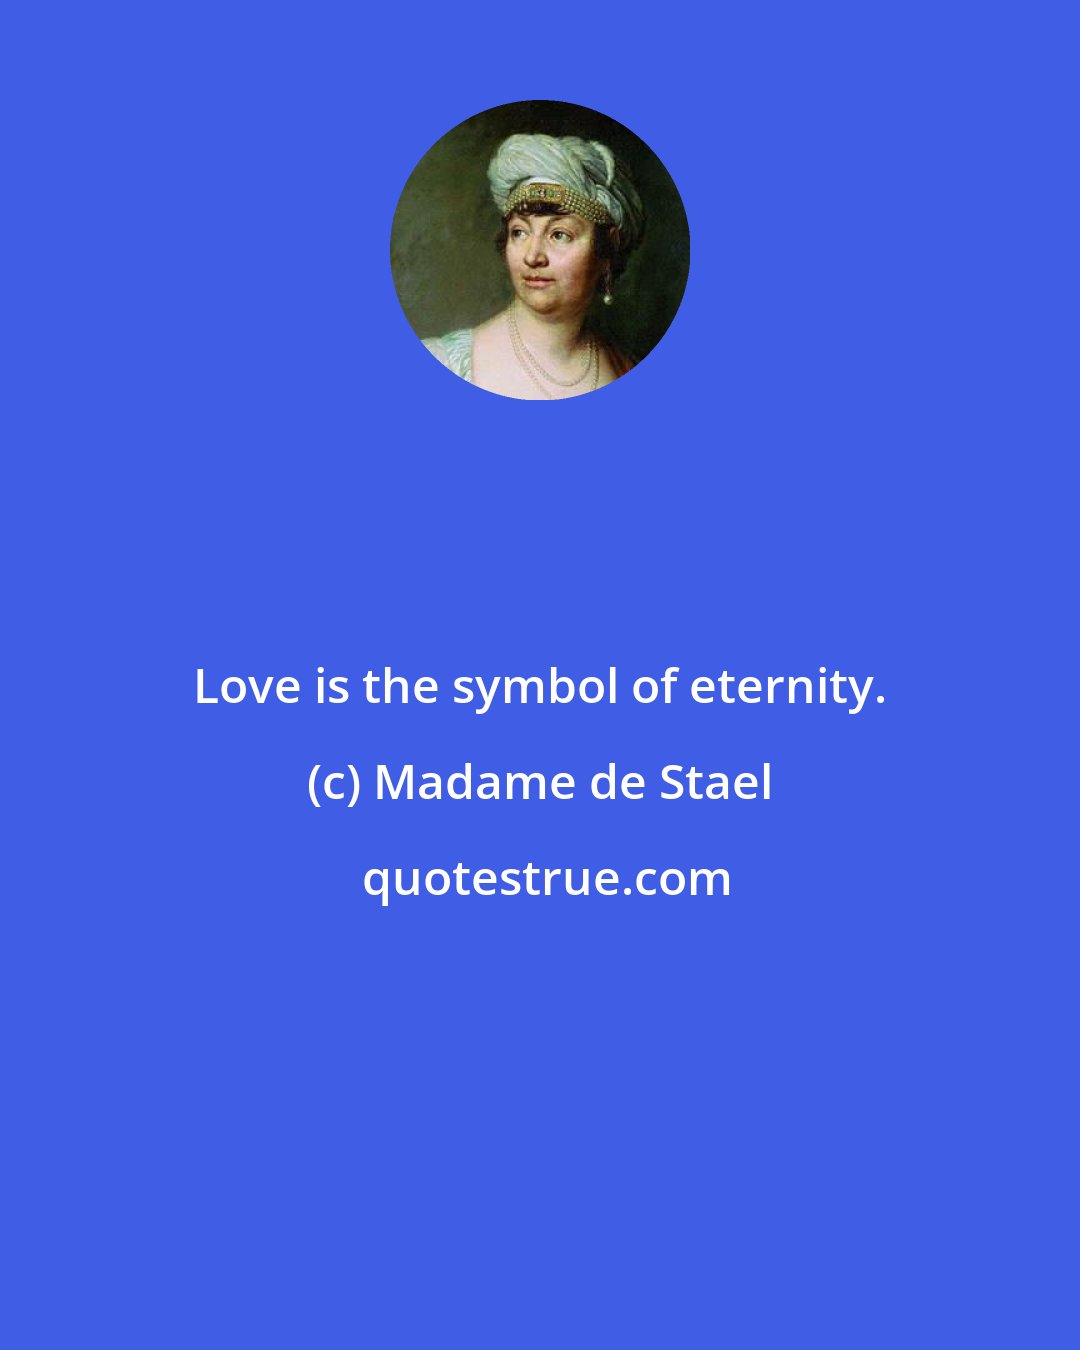 Madame de Stael: Love is the symbol of eternity.